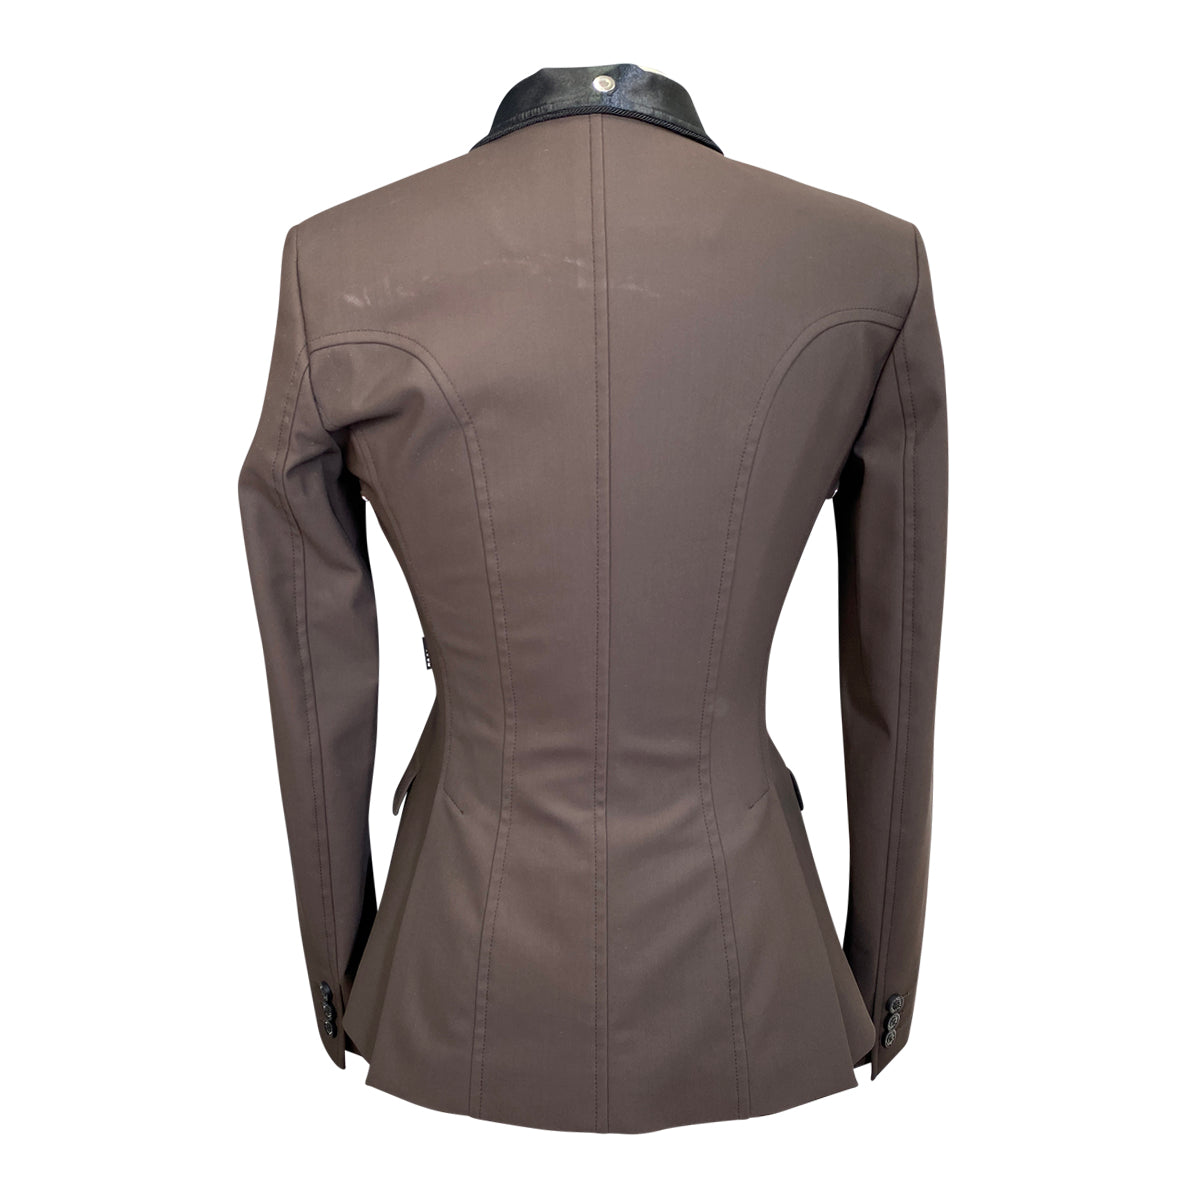 Equiline 'GAIT' Custom X-Cool Show Coat in Brown w/Black Accents 